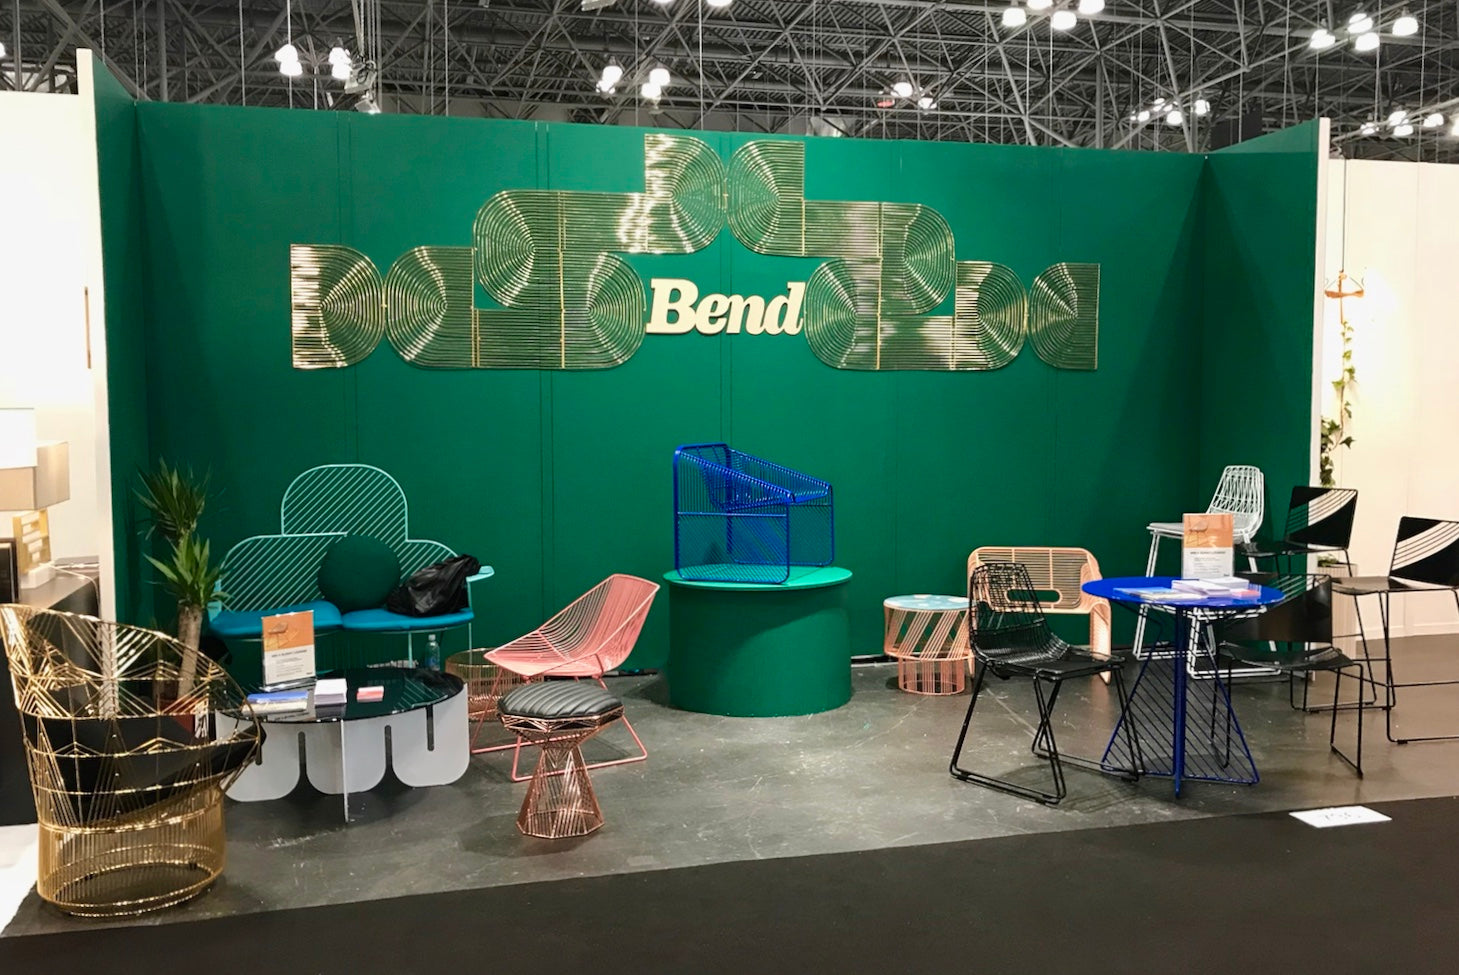 ICFF - 2018 IN REVIEW